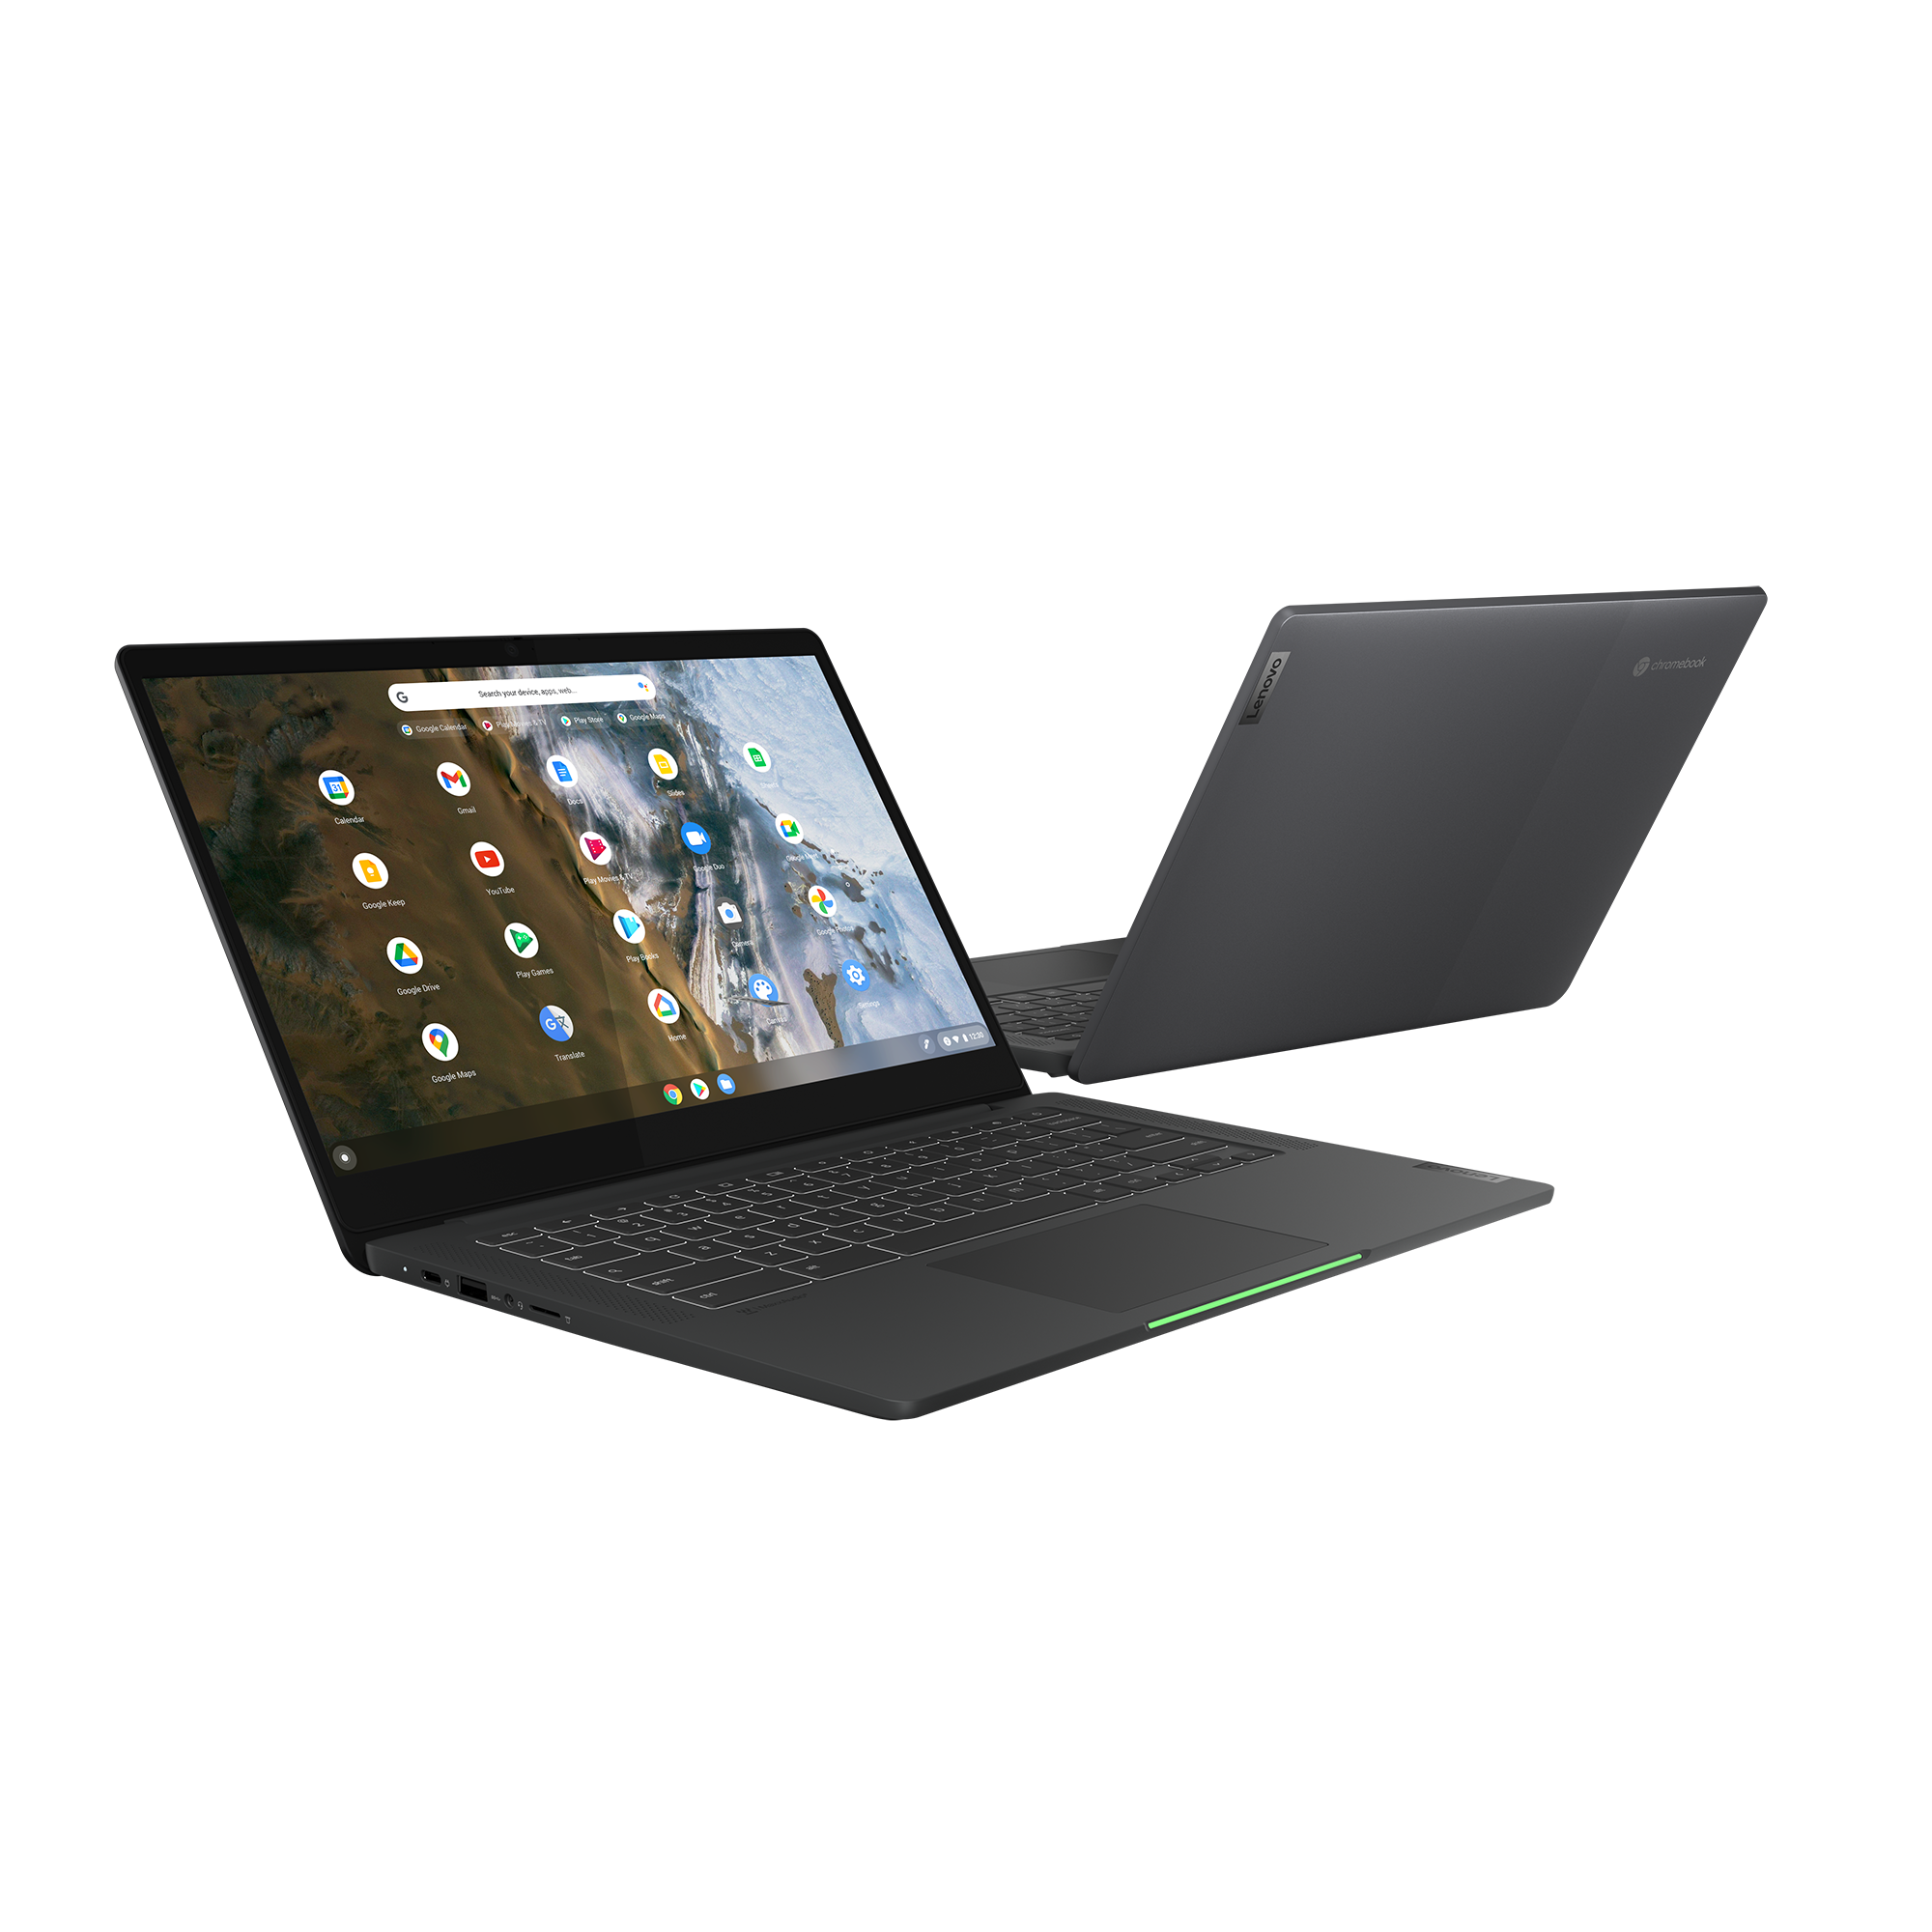 Lenovo’s new Chromebooks are here to sweep you off your feet - Phandroid